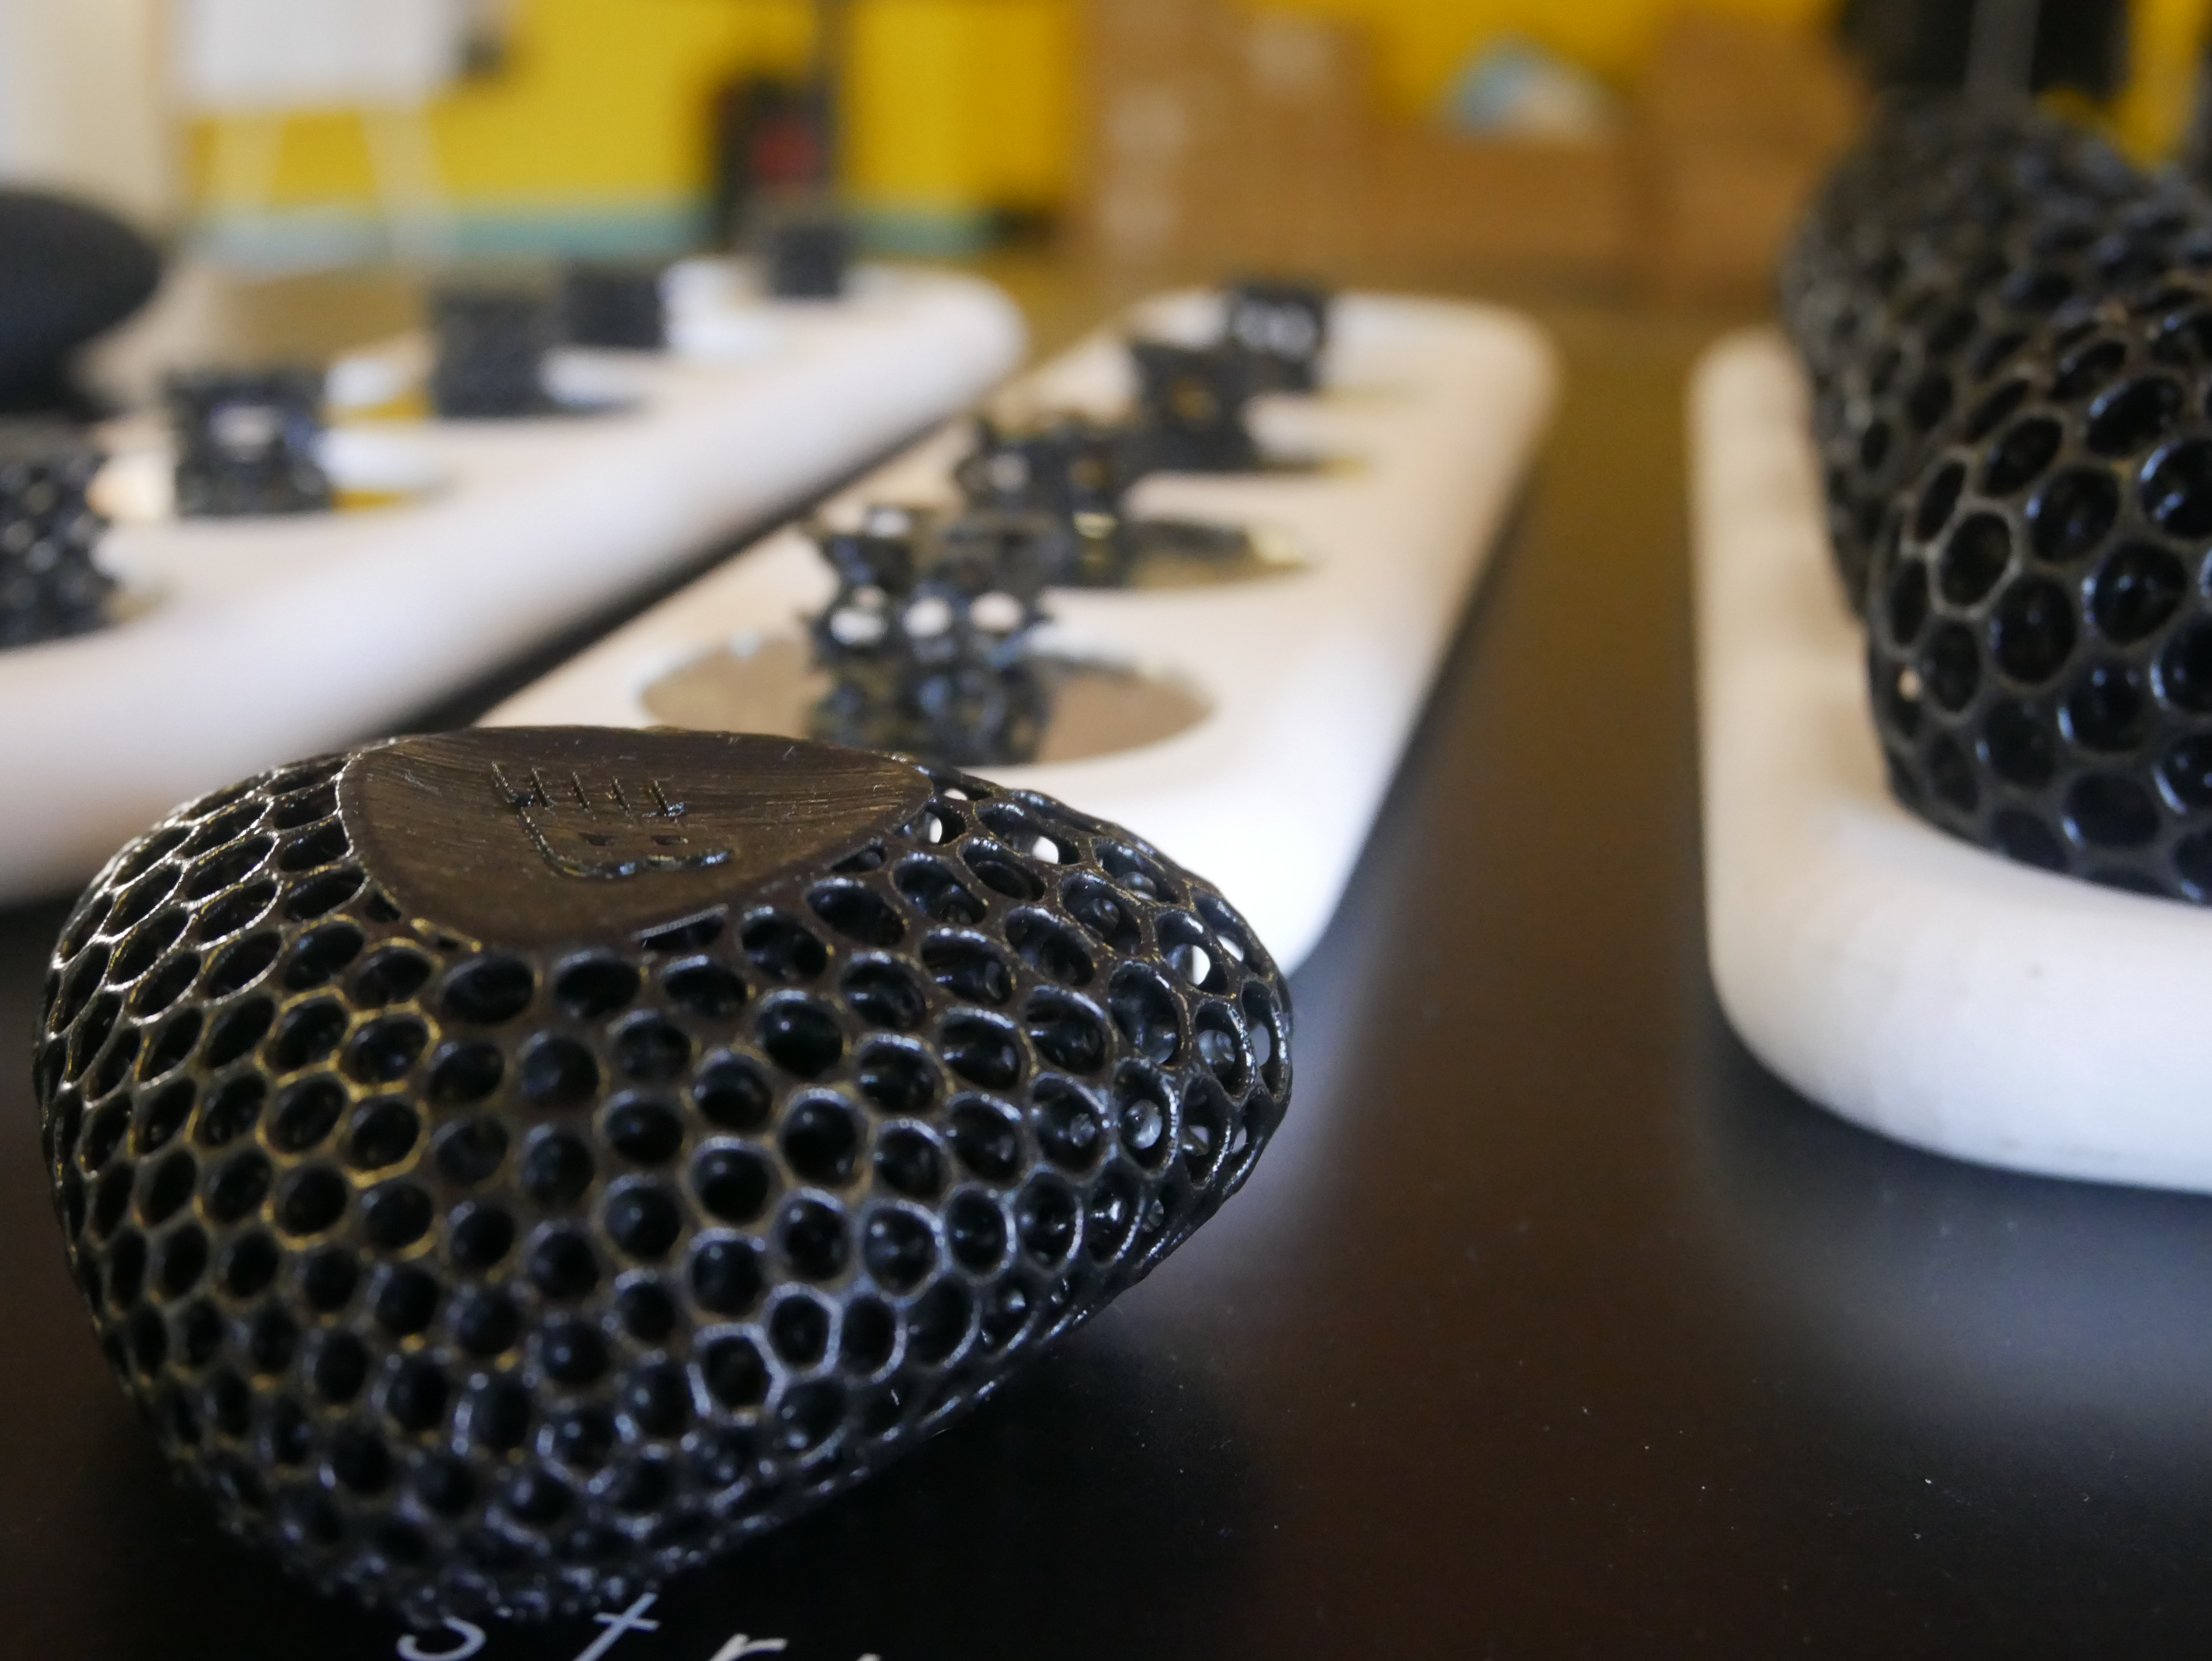 3D printed forms created from the newly developed New Balance Formlabs resin. Photo by Tia Vialva.